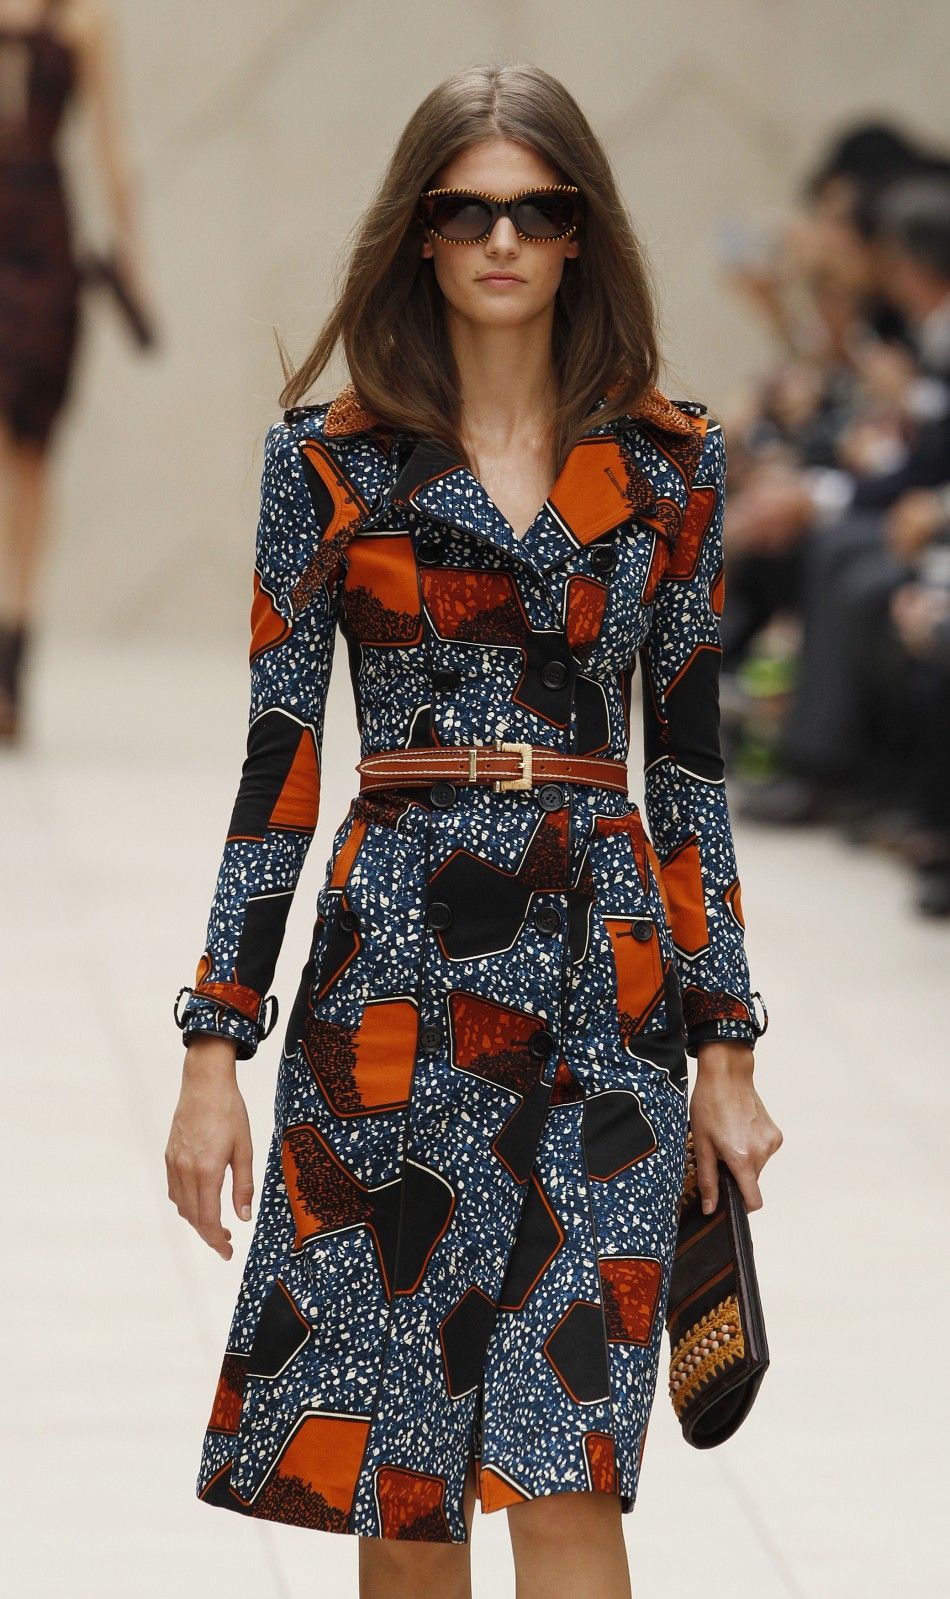 A model presents a creation from the Burberry Prorsum 2012 SpringSummer collection during London Fashion Week